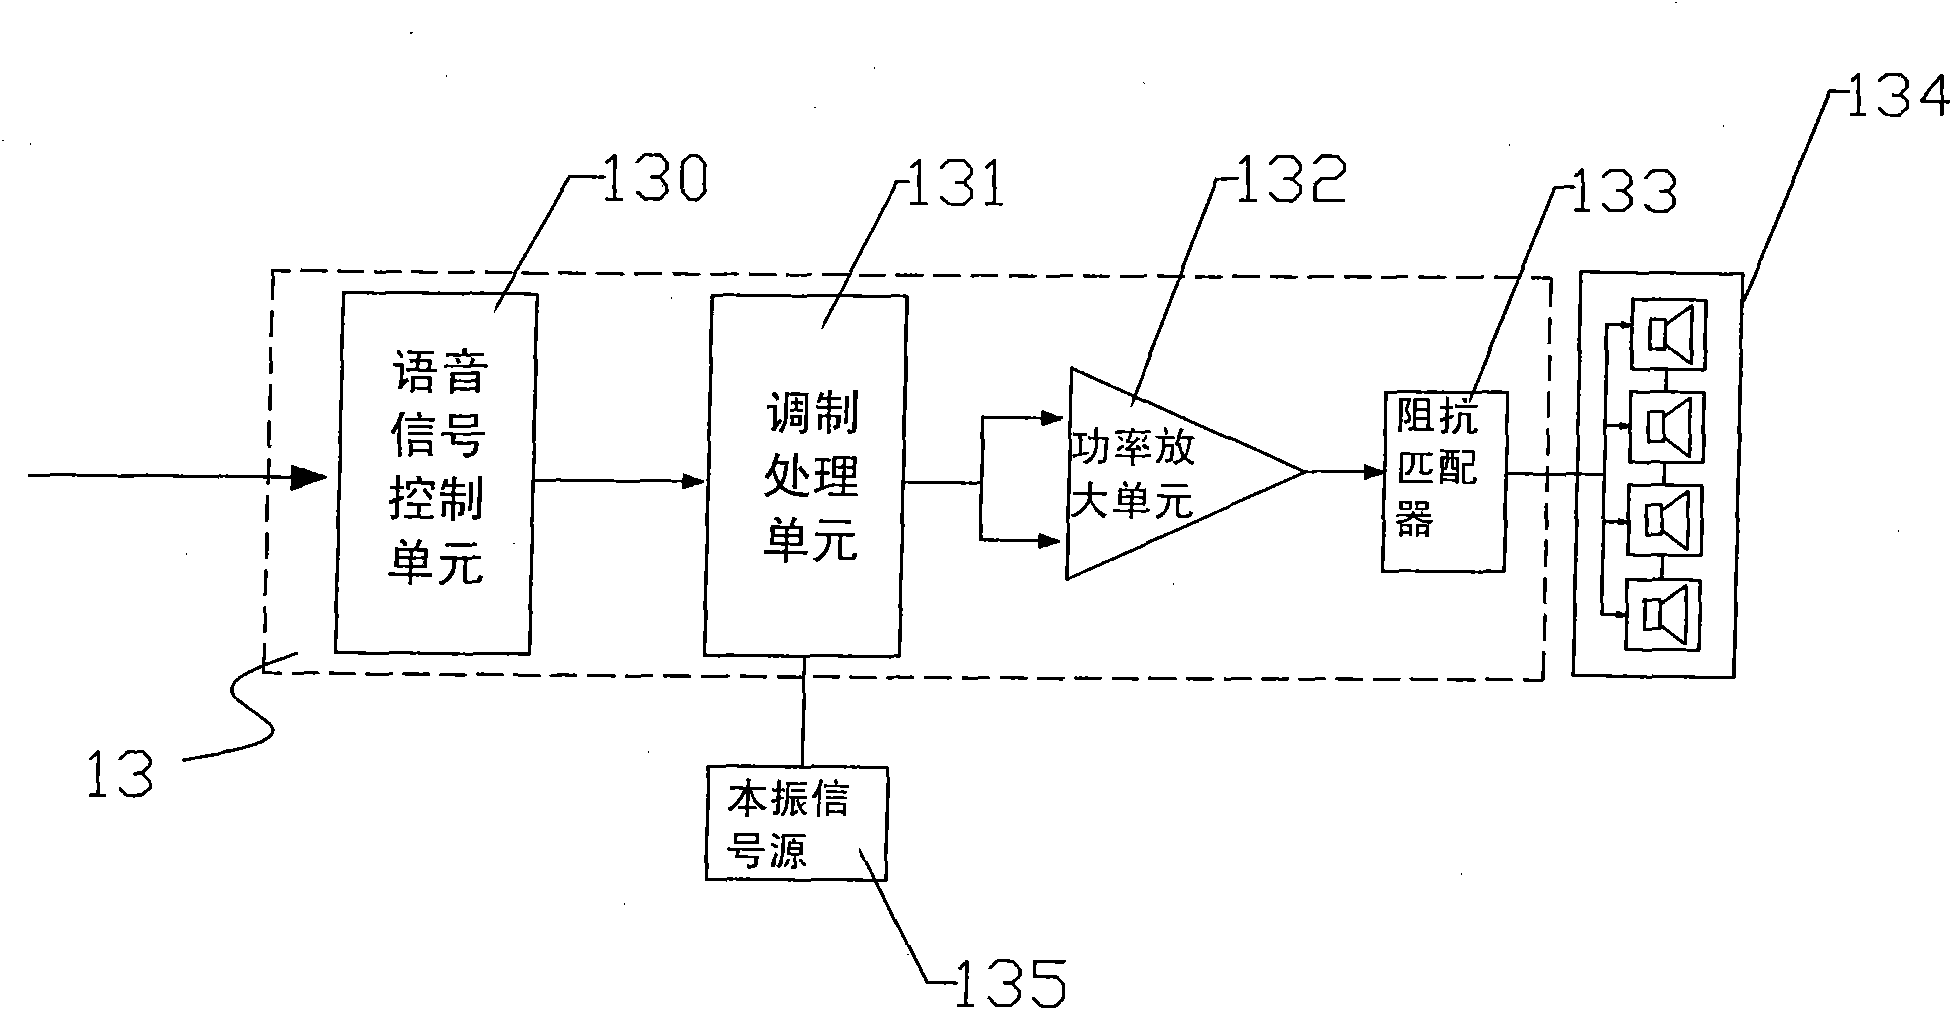 Directional sound advertisement system based on network control and network control method